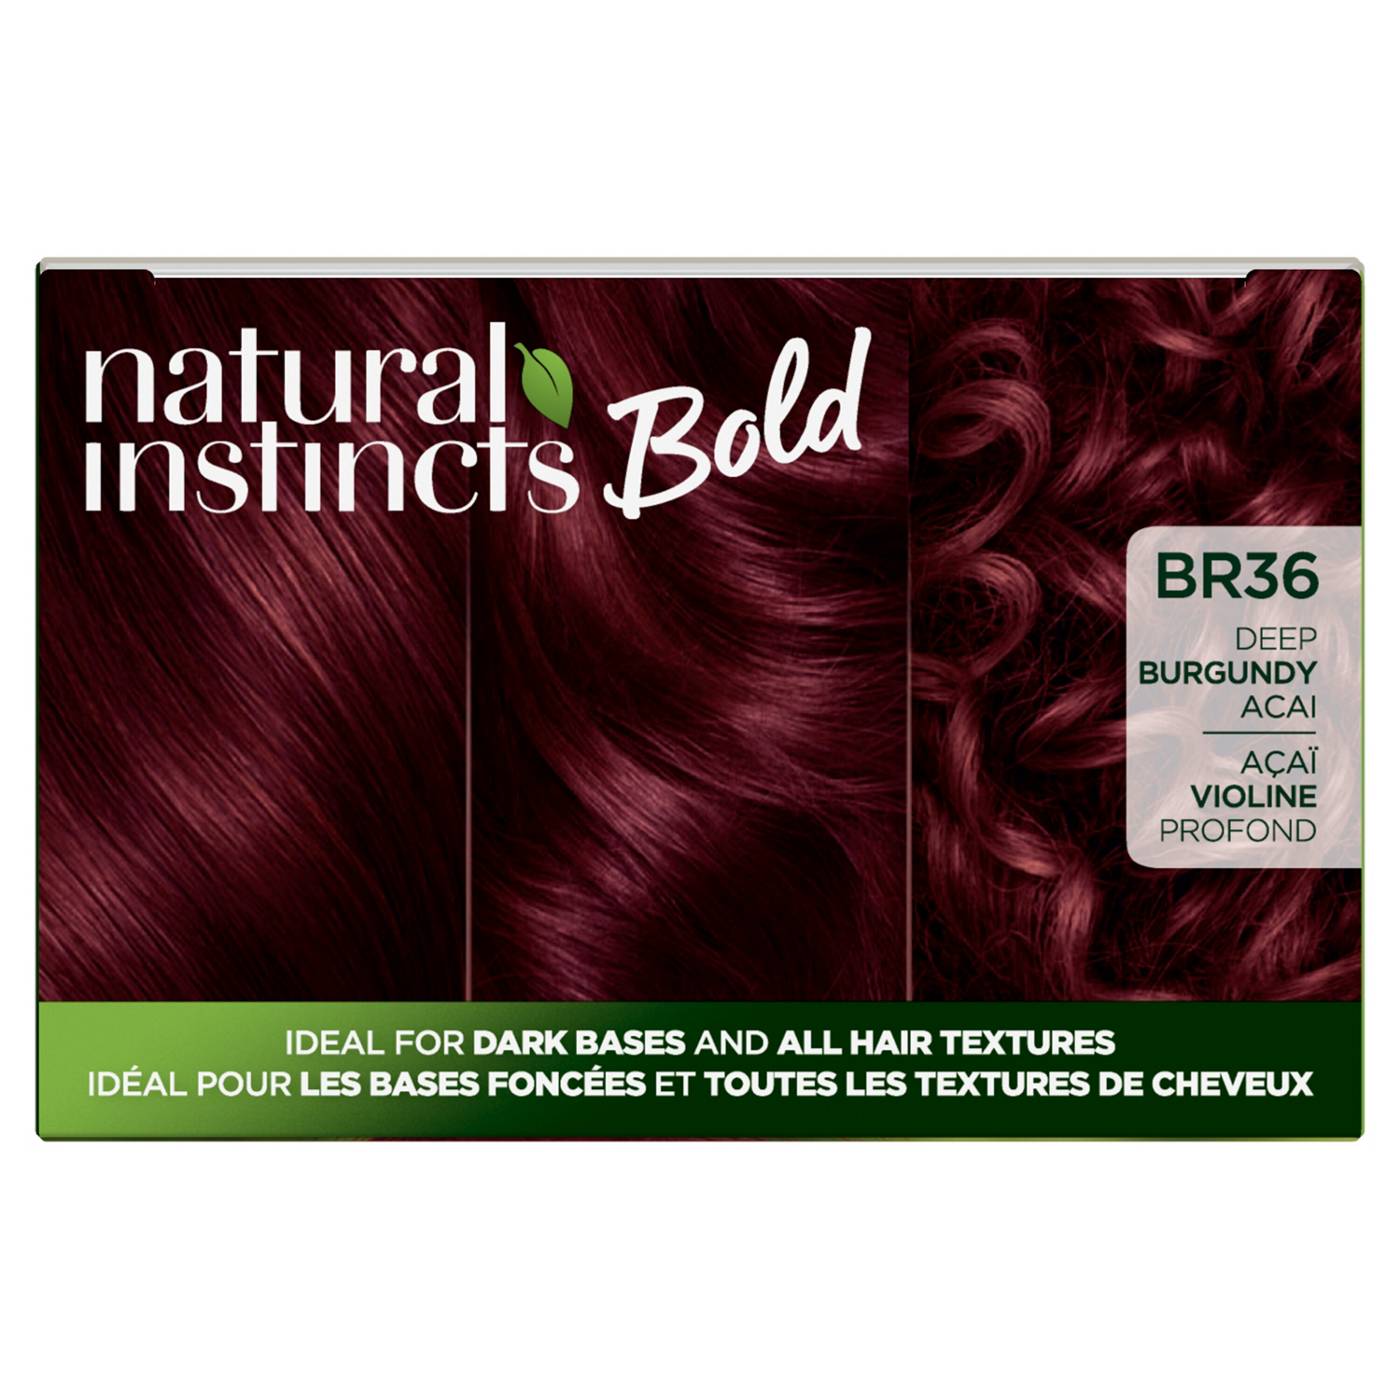 Clairol Natural Instincts Bold Permanent Hair Color - BR36 Deep Burgundy Acai ; image 2 of 6